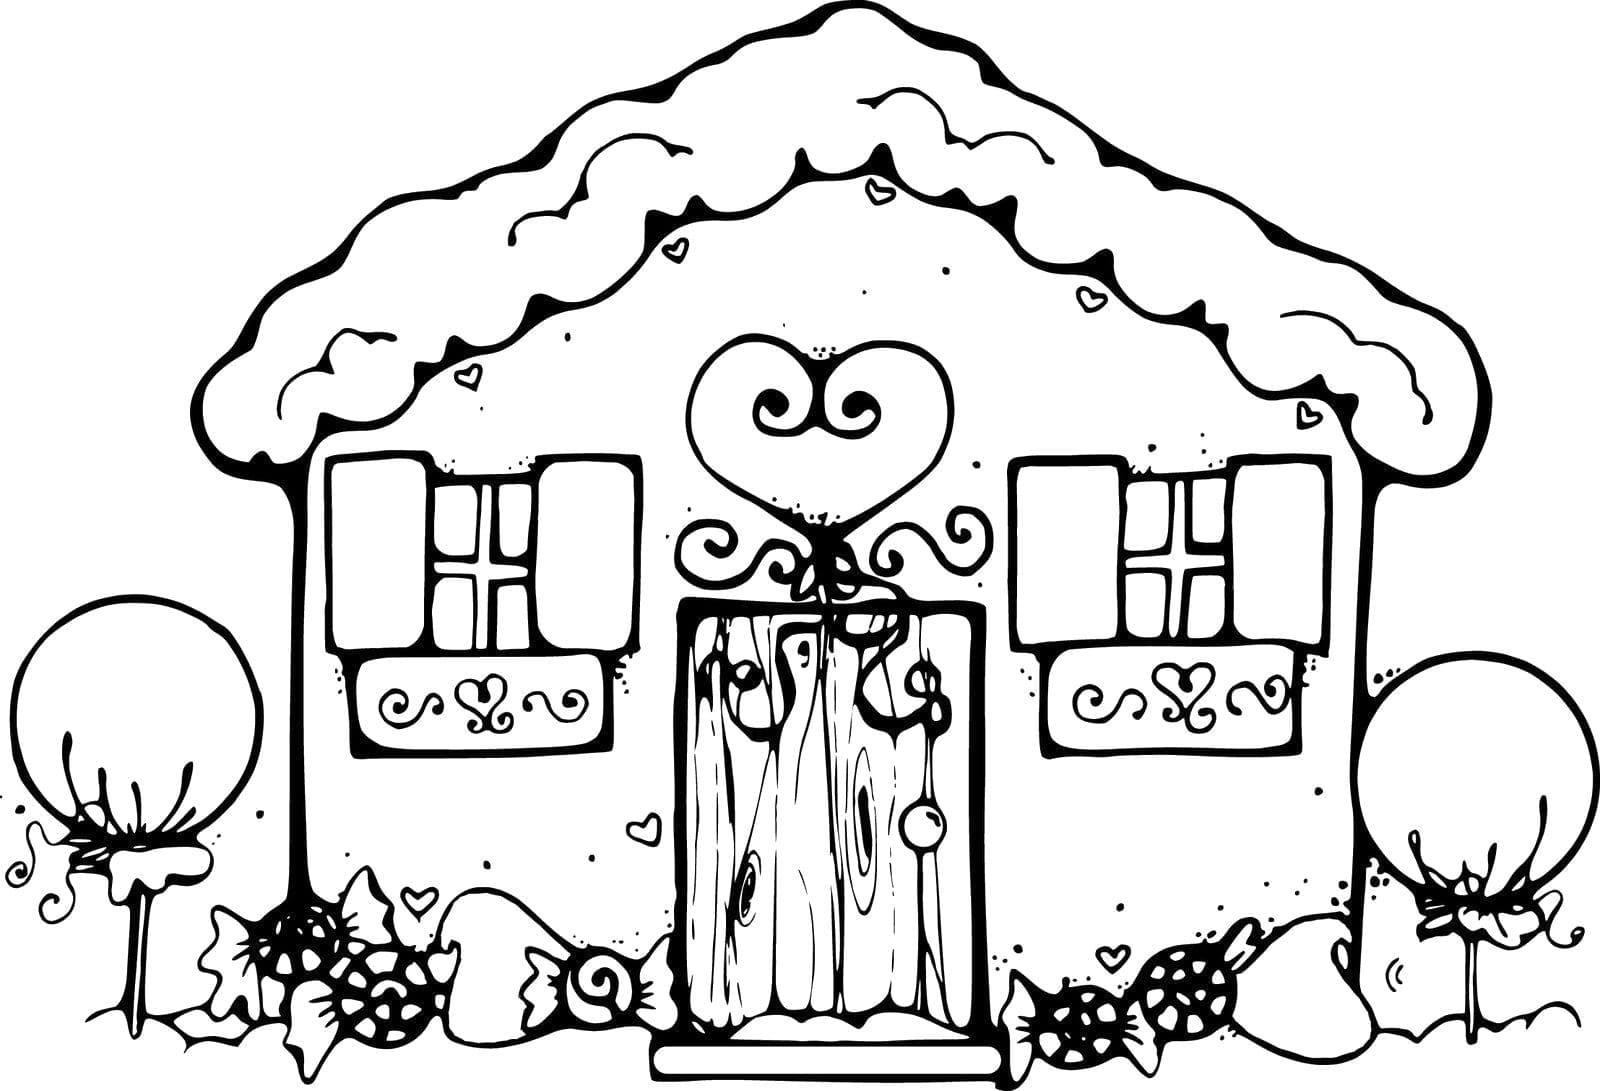 Houses Coloring Pages. Free Collection of Images For Children's Creativity